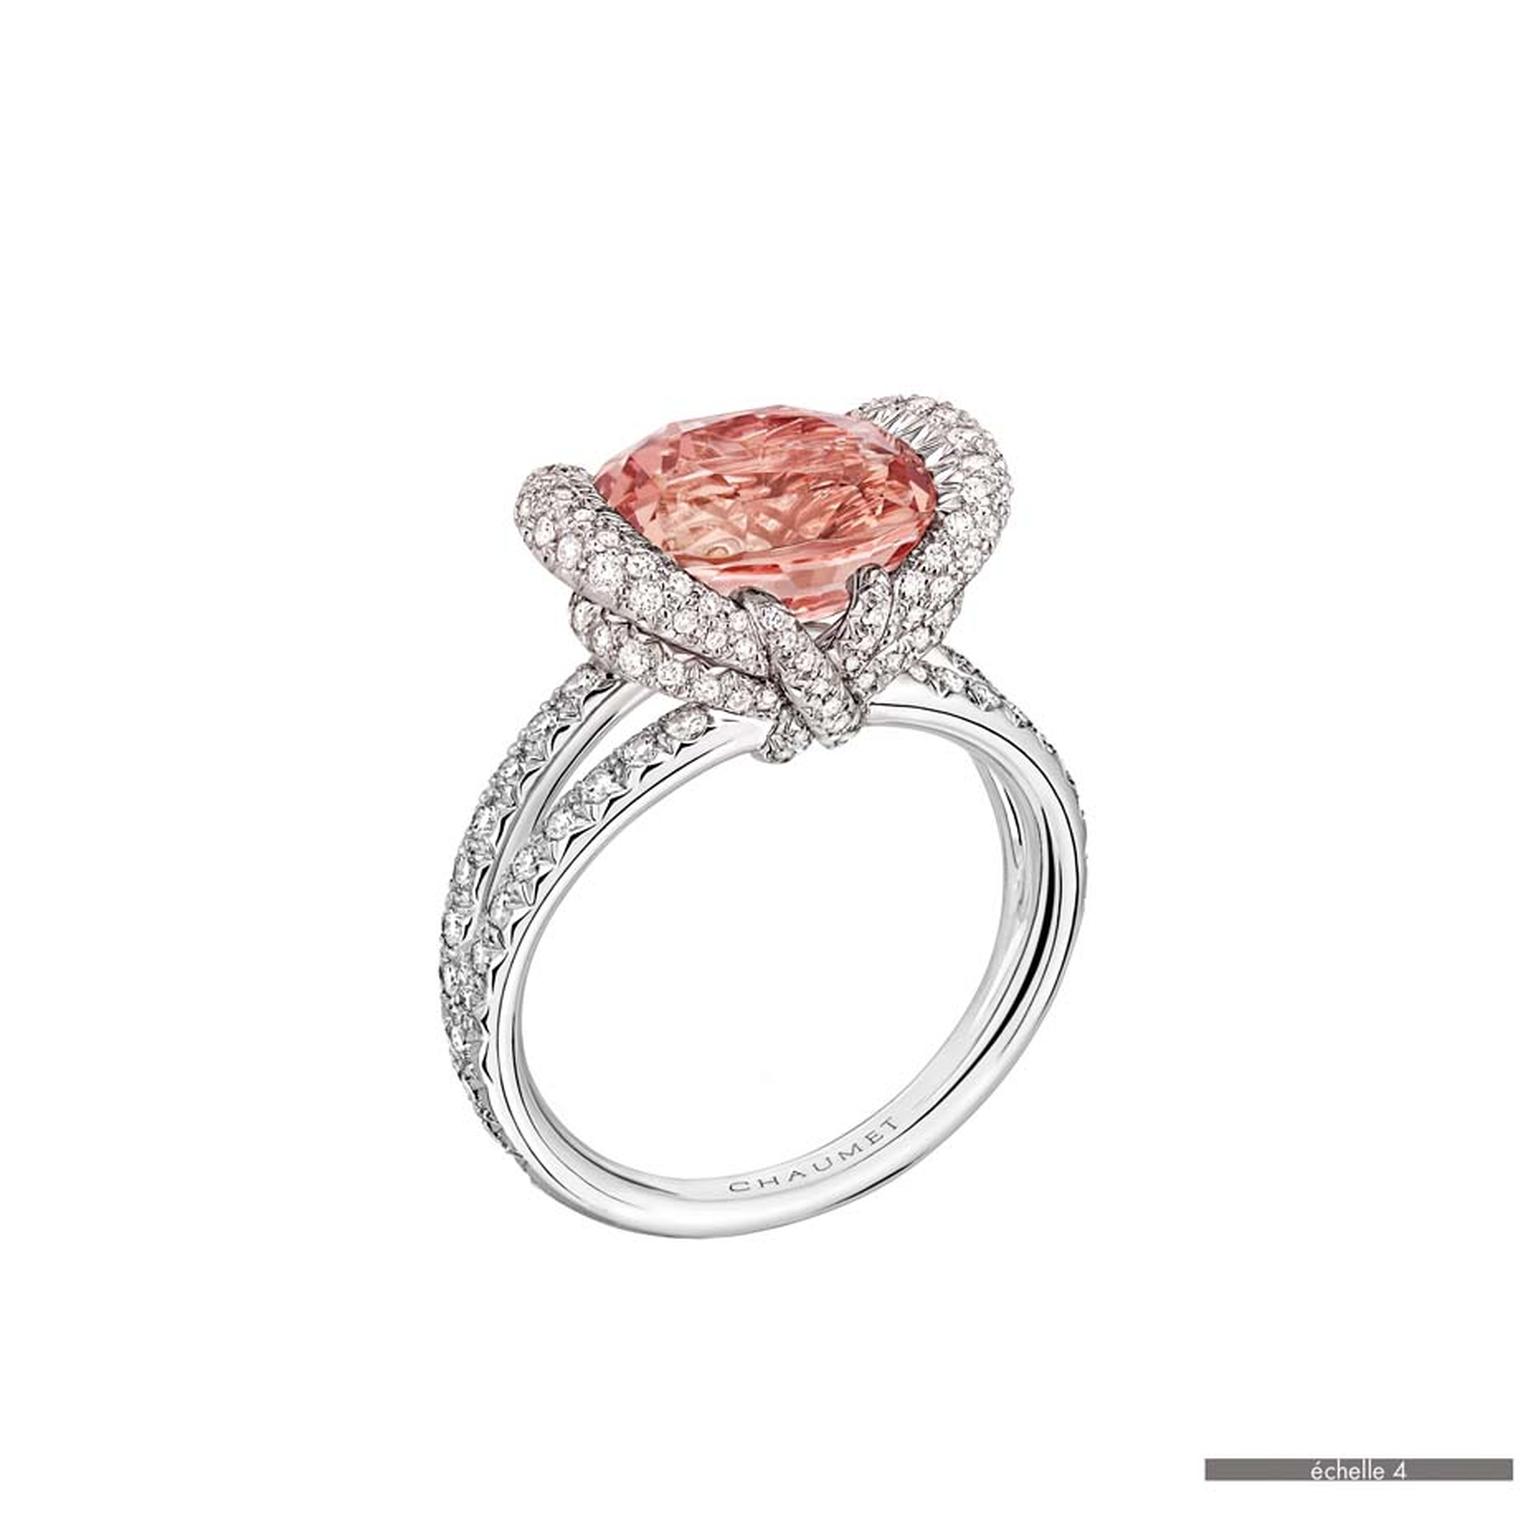 Chaumet Liens ring in white gold featuring 142 brilliant-cut diamonds and a padparadscha sapphire (5.29ct).